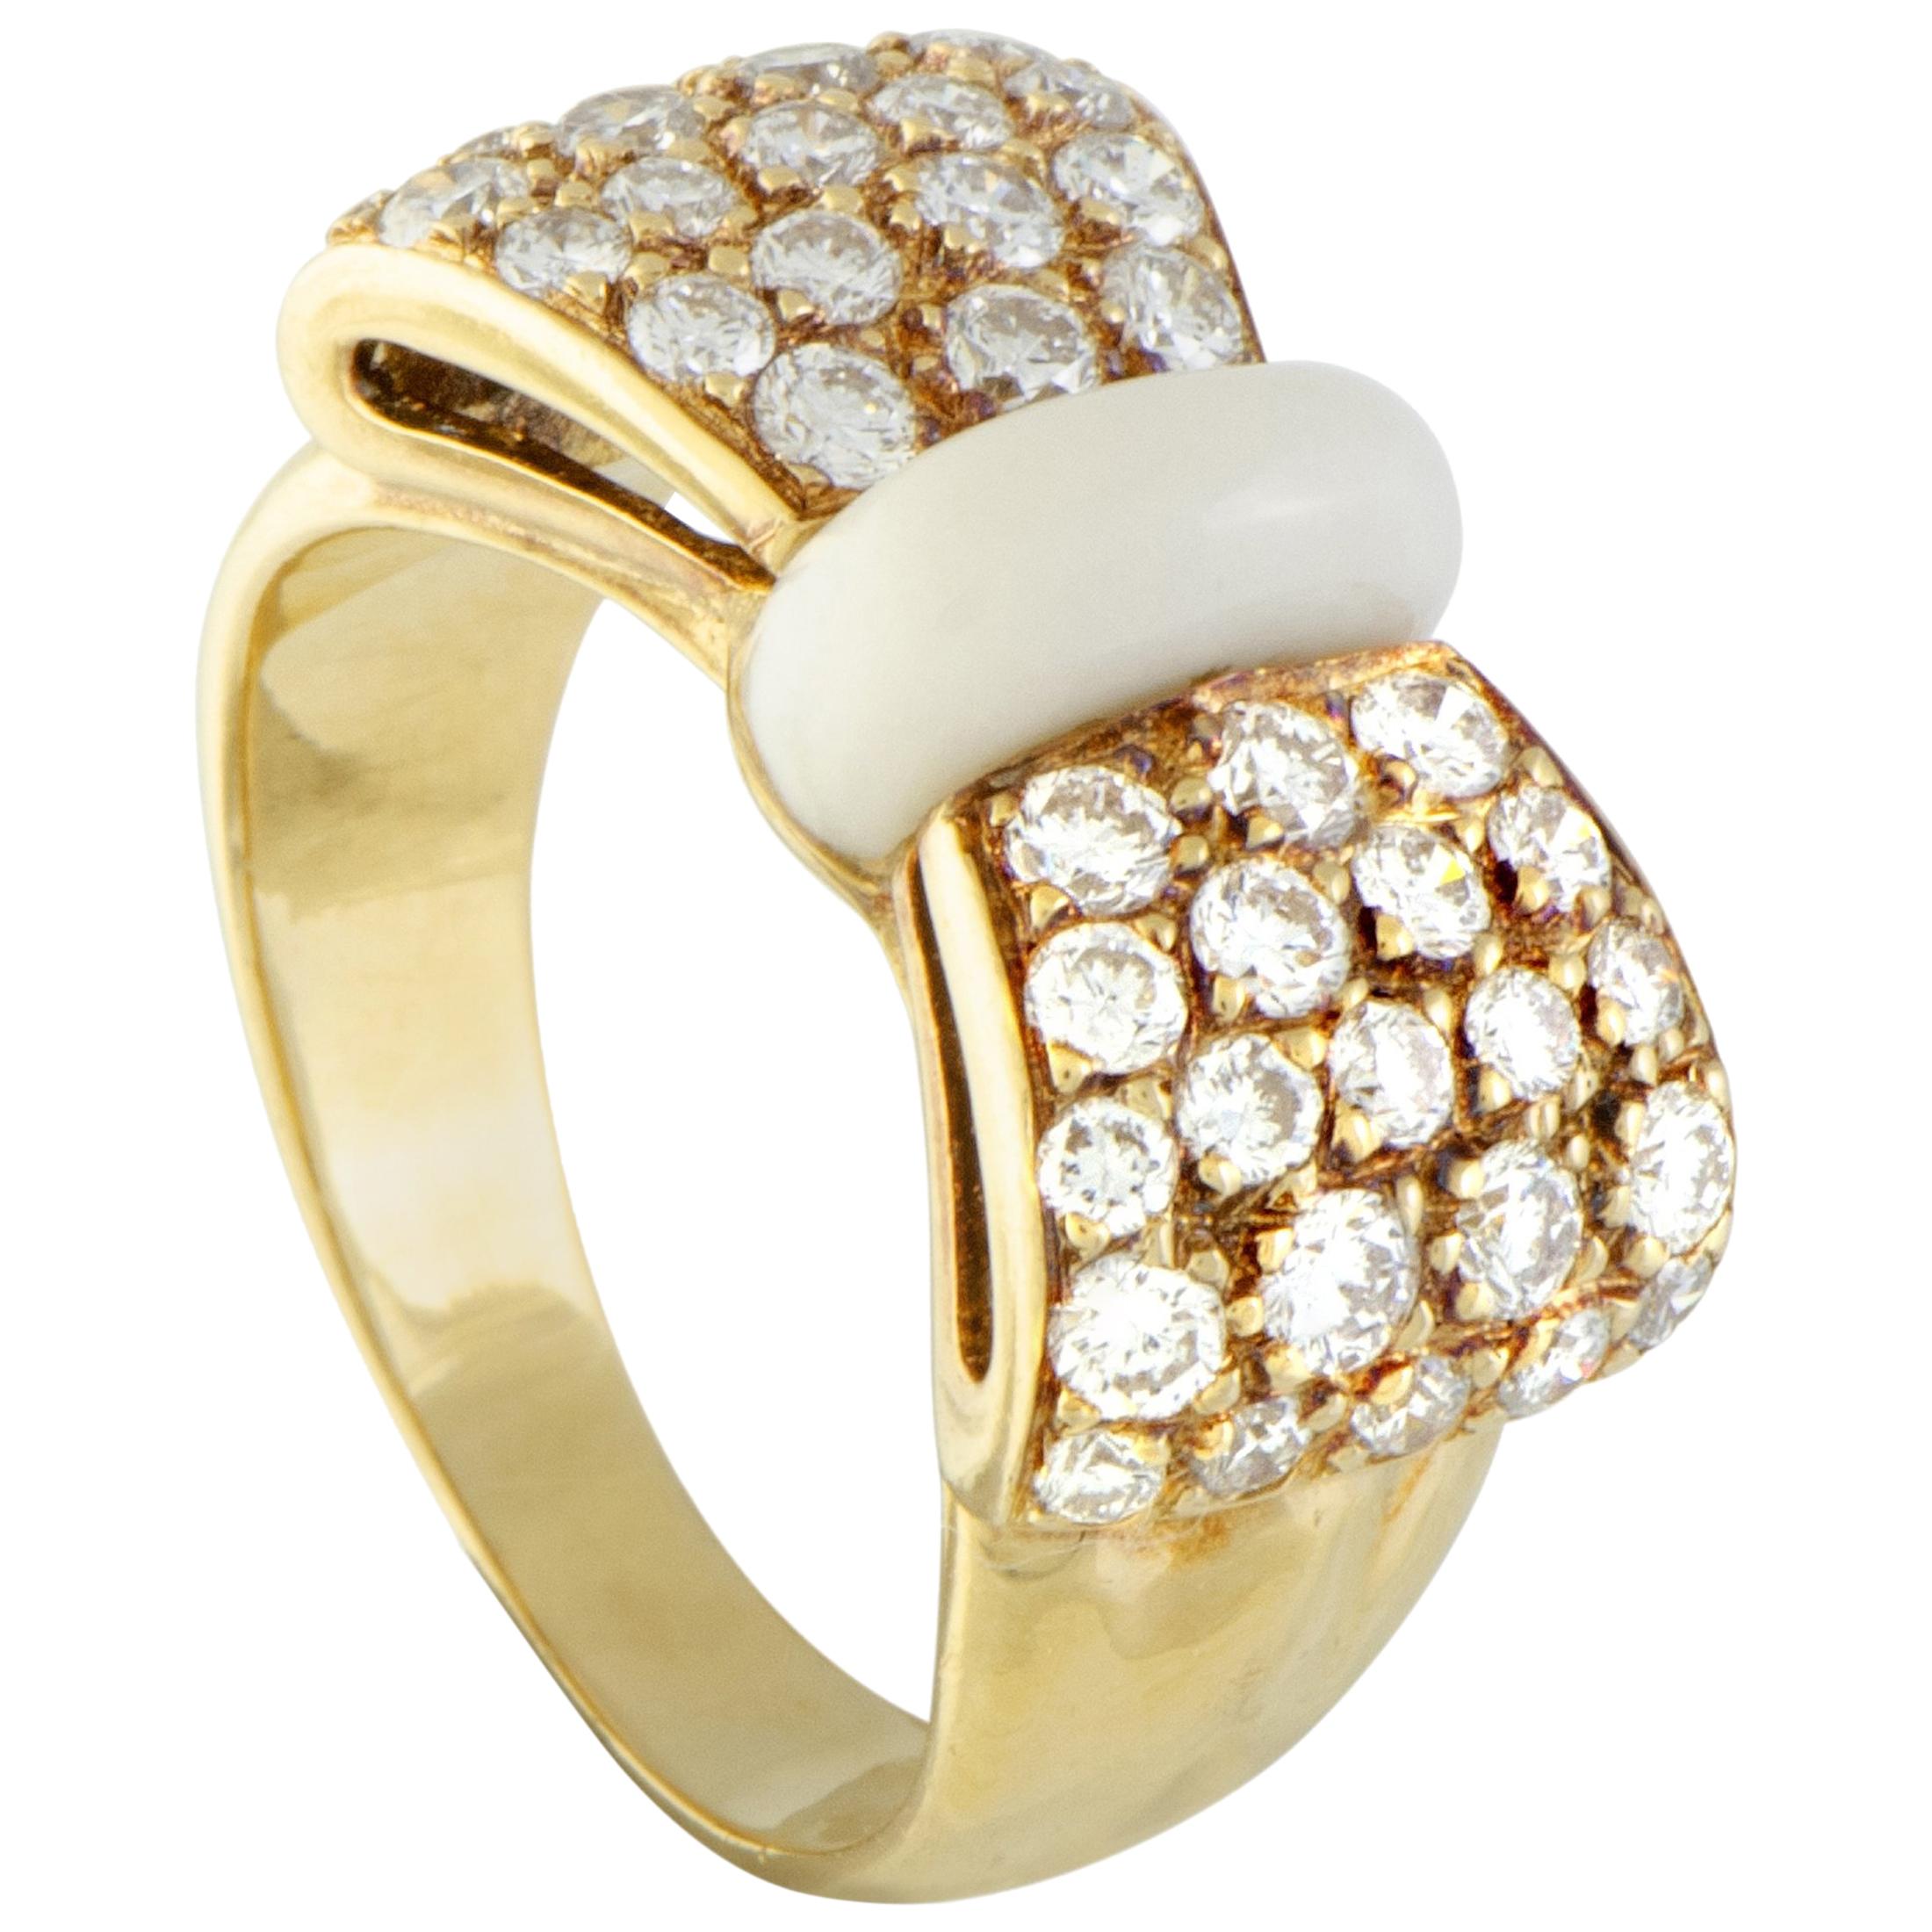 Van Cleef & Arpels 18 Karat Yellow Gold Diamond Pave and White Agate Bow Ring